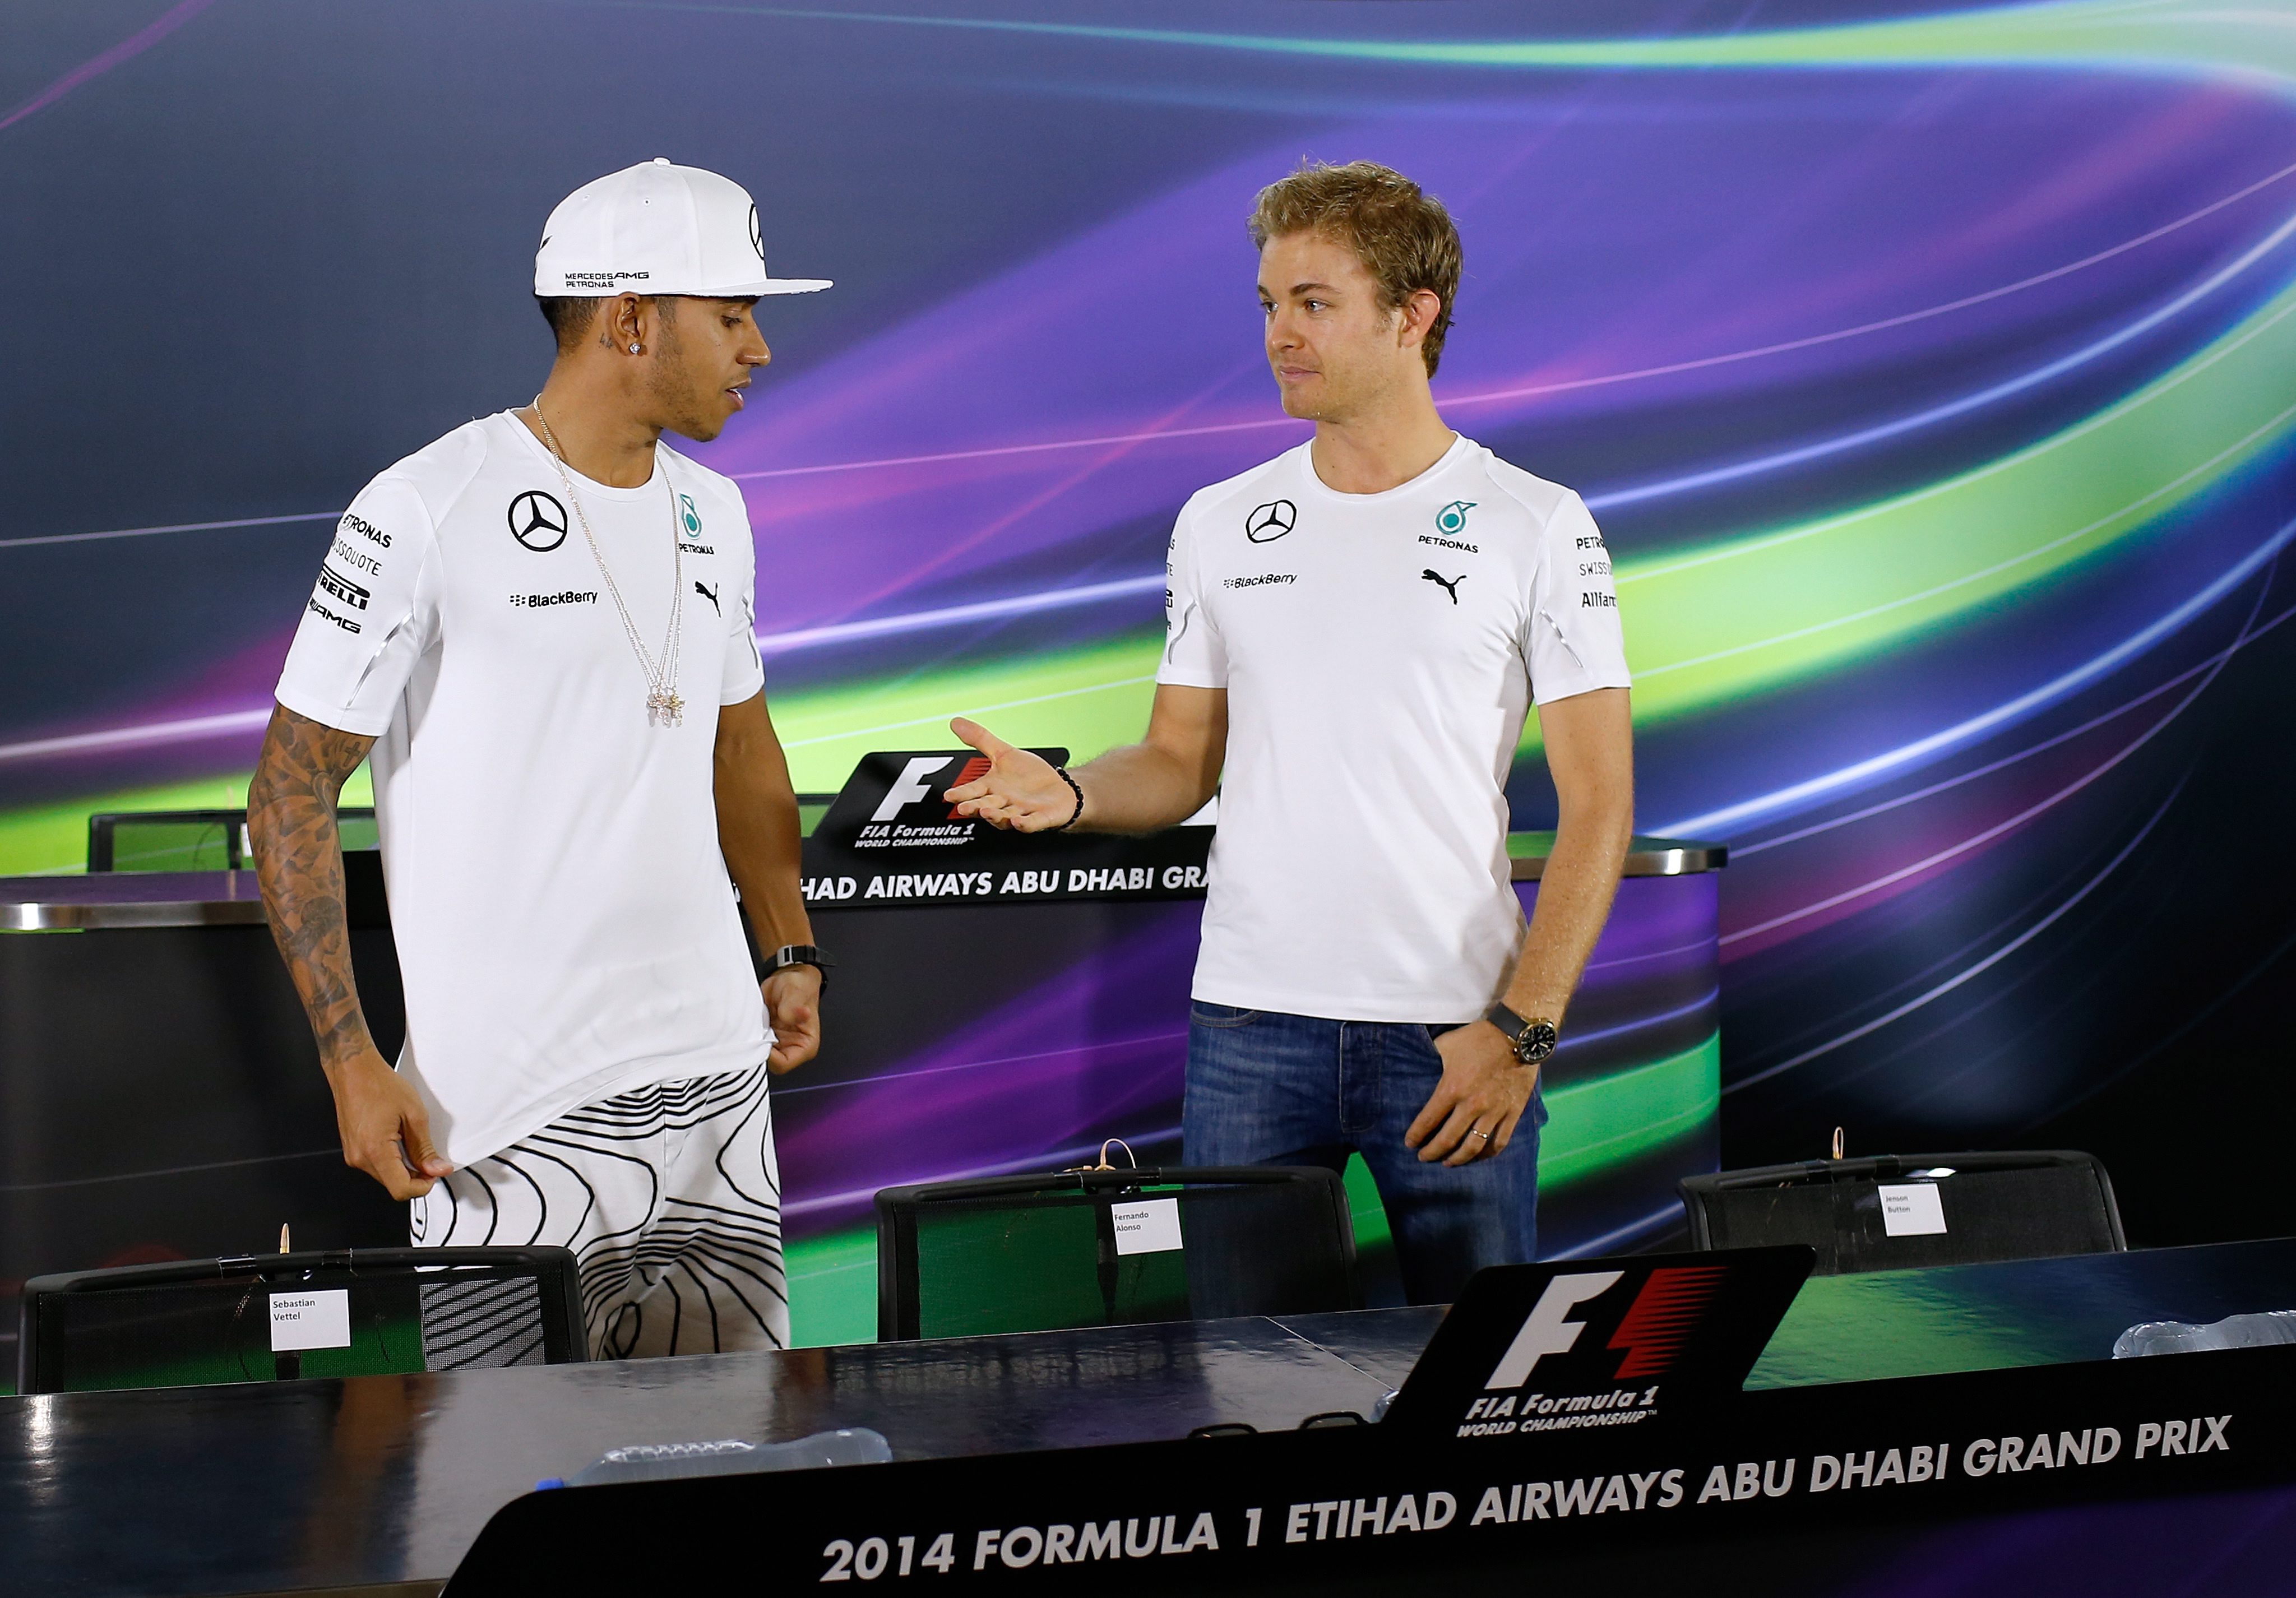 The body language between Lewis Hamilton and Nico Rosberg is not good before a posed handshake at a media conference on Thursday for Sunday's Abu Dhabi Grand Prix. Photo: EPA